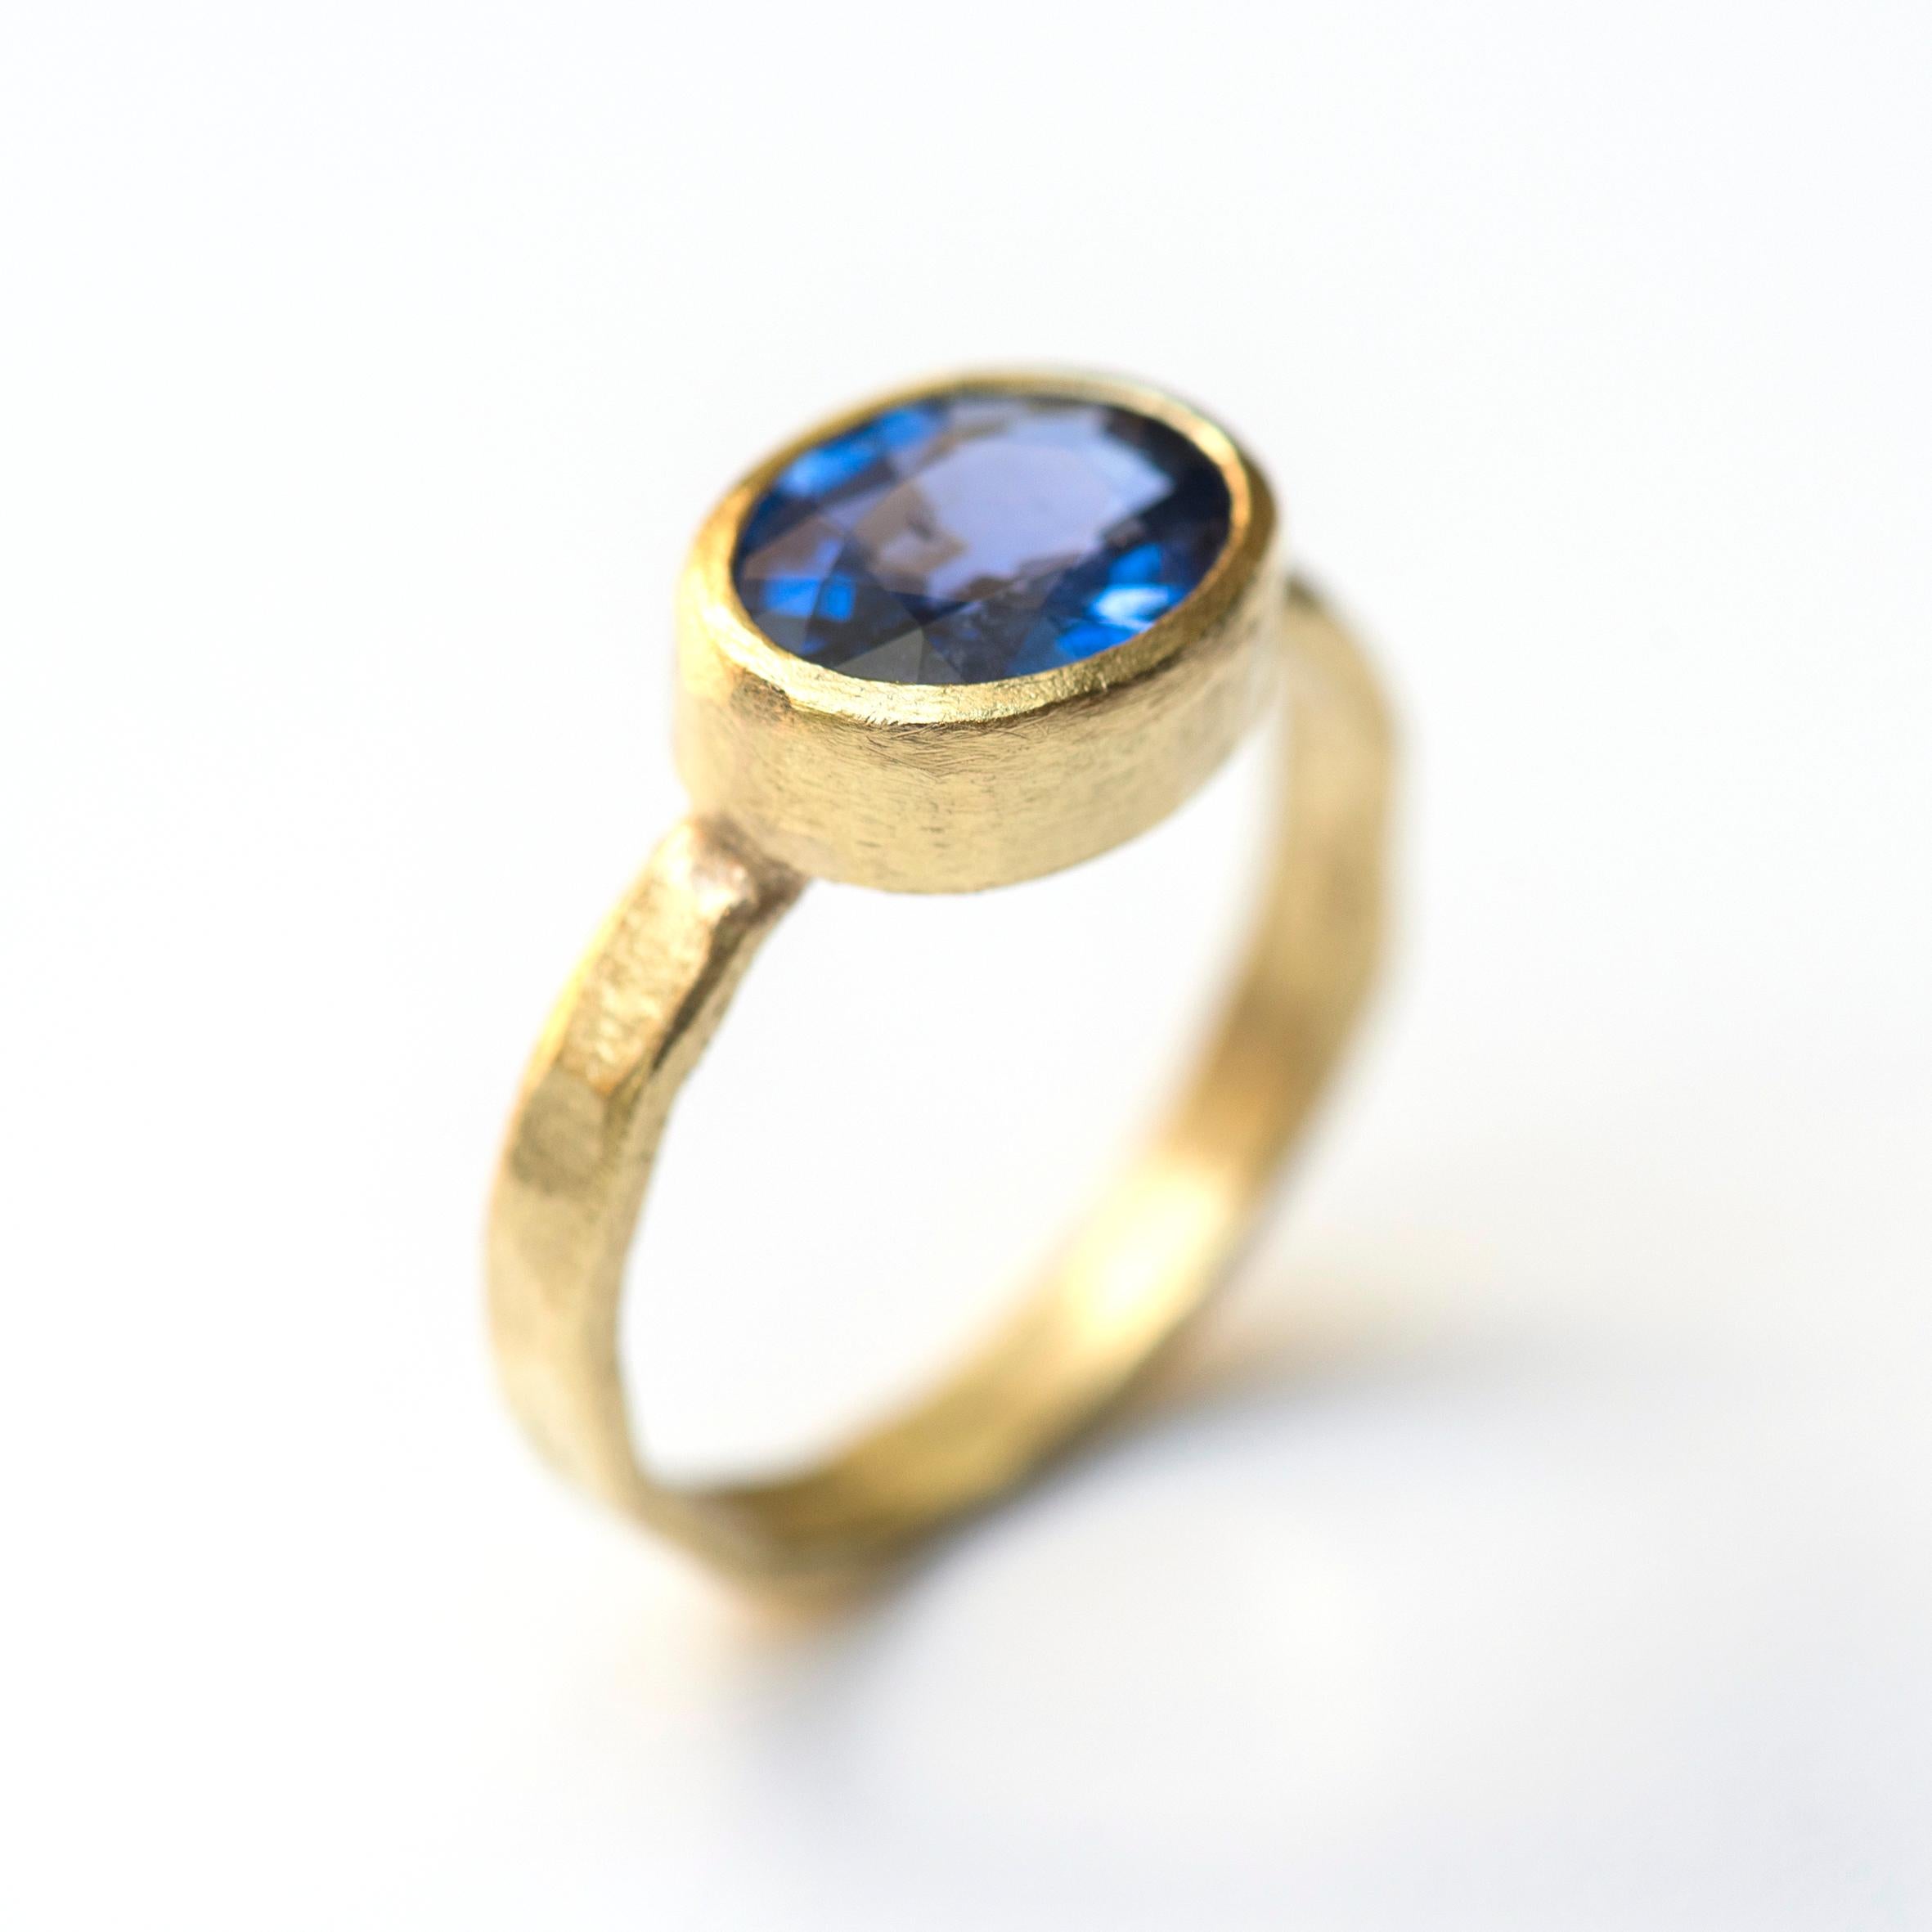 A stunning cornflower blue sapphire set in 18k yellow gold with a hammered texture finish handmade by Disa Allsopp.

The hammered texture band is 3mm wide while the stone sits at 4mm height. The contrast between the warm 18k gold and blue of the